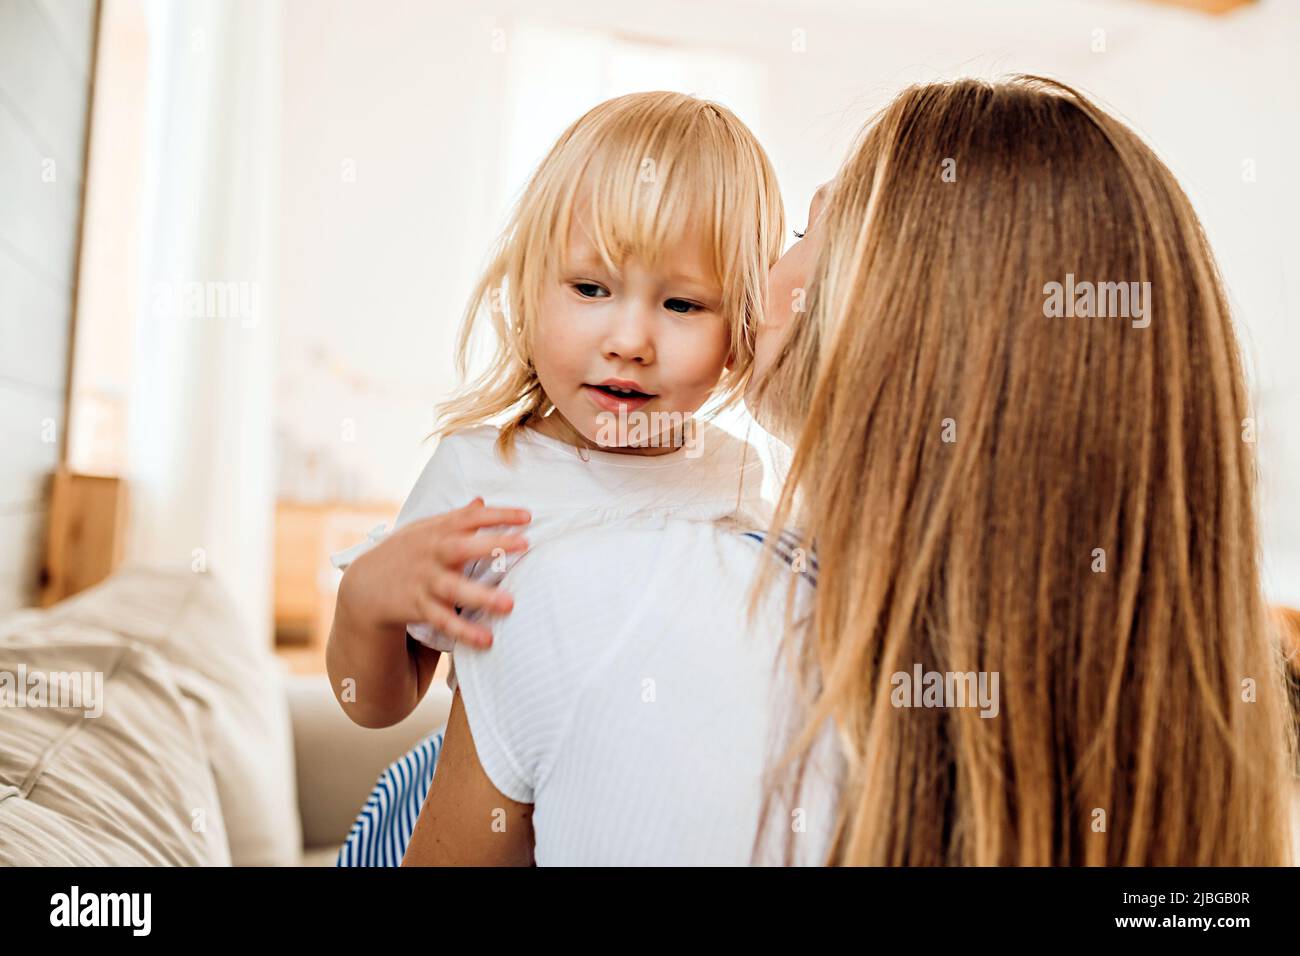 A young mother kisses her little daughter while playing at home. Family leisure lifestyle image Stock Photo